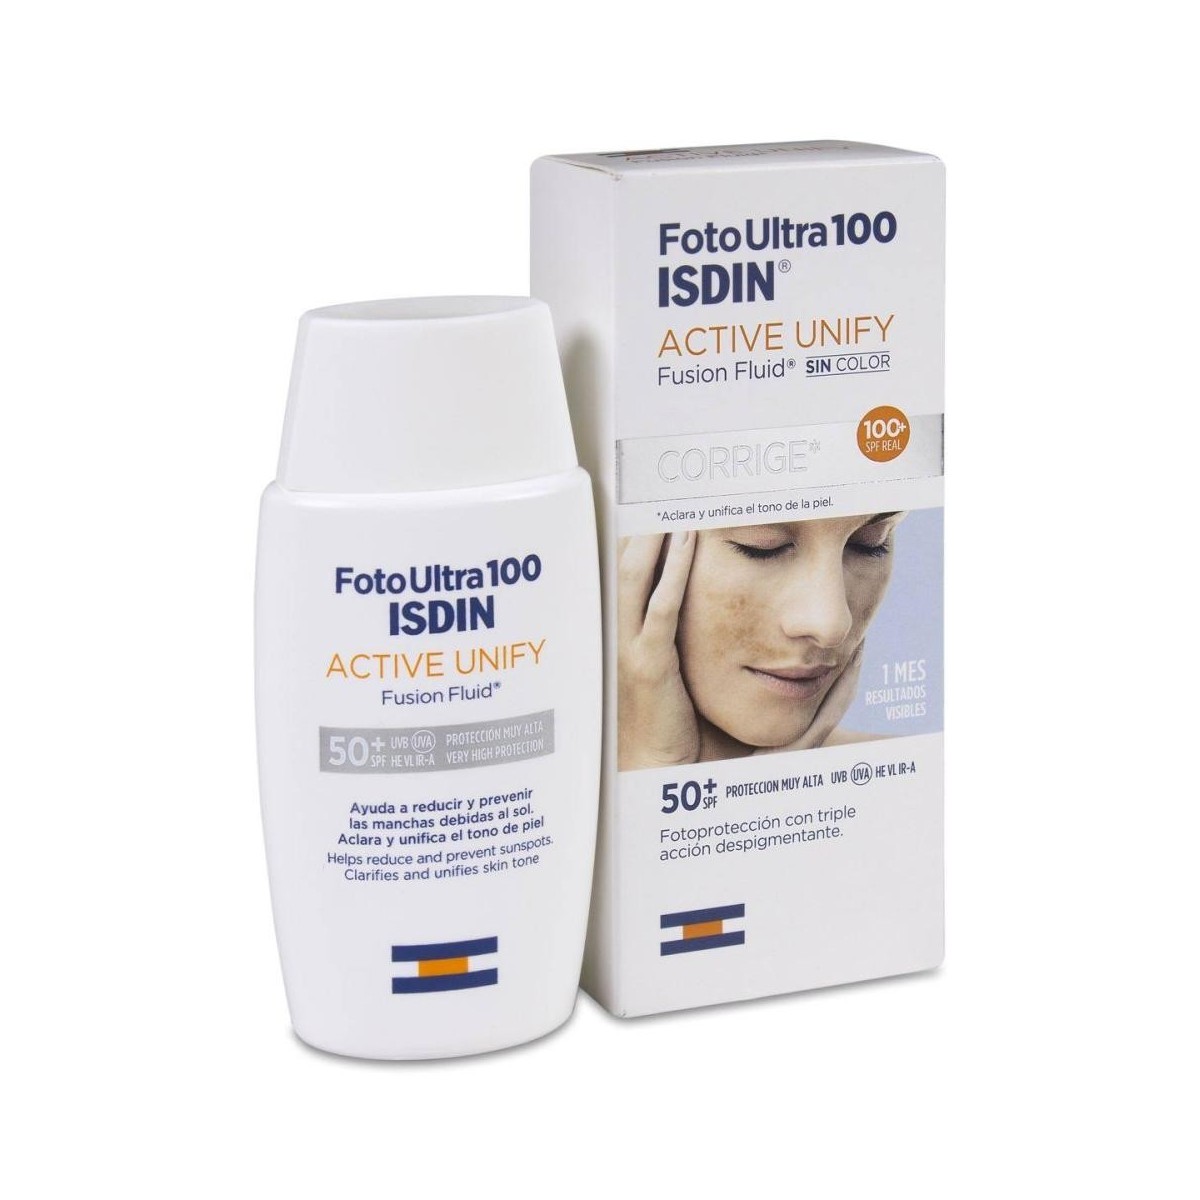 isdin-fotoultra-100-active-unify-fusion-fluid-50-ml